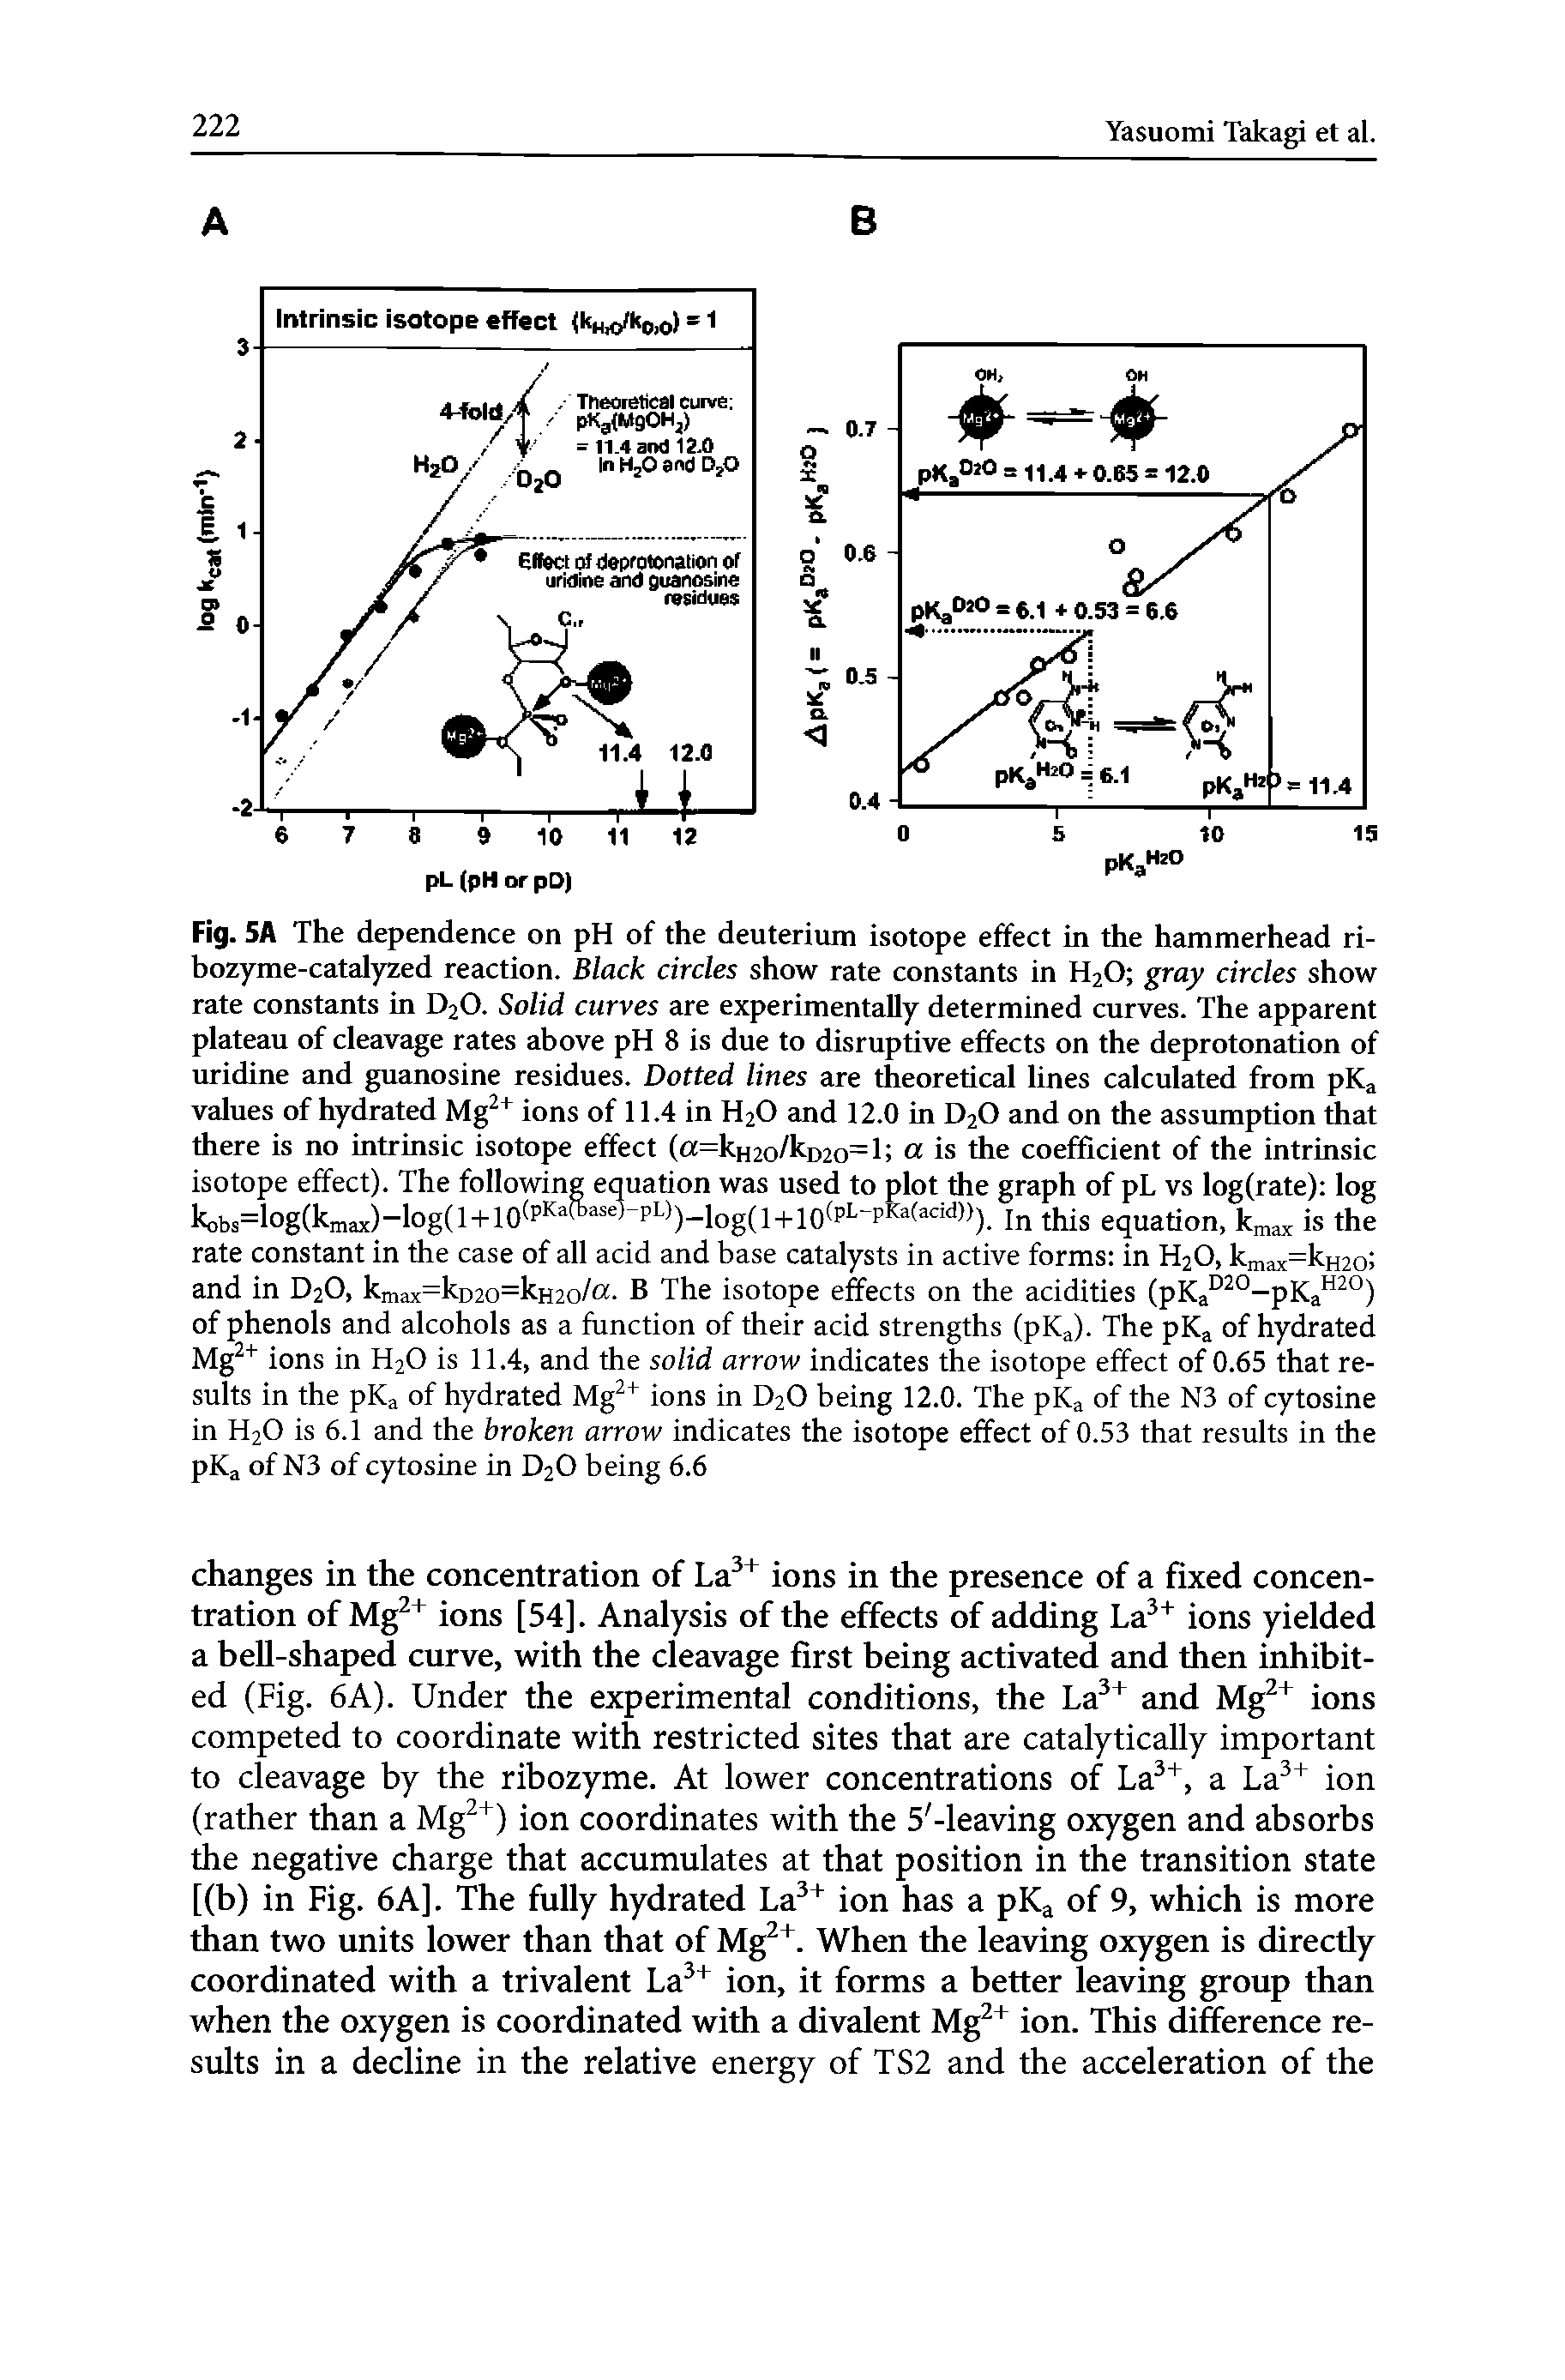 Fig. 5A The dependence on pH of the deuterium isotope effect in the hammerhead ri-bozyme-catalyzed reaction. Black circles show rate constants in H2O gray circles show rate constants in D2O. Solid curves are experimentally determined curves. The apparent plateau of cleavage rates above pH 8 is due to disruptive effects on the deprotonation of uridine and guanosine residues. Dotted lines are theoretical lines calculated from pKa values of hydrated Mg ions of 11.4 in H2O and 12.0 in D2O and on the assmnption that there is no intrinsic isotope effect (a=kH2o/kD2o=l is the coefficient of the intrinsic isotope effect). The following equation was used to plot the graph of pL vs log(rate) log kobs=log(kmax)-log(l+10<PKa< " =5-P -))-log(l+10(pL-pKa(add))) equation, k, ax is the...